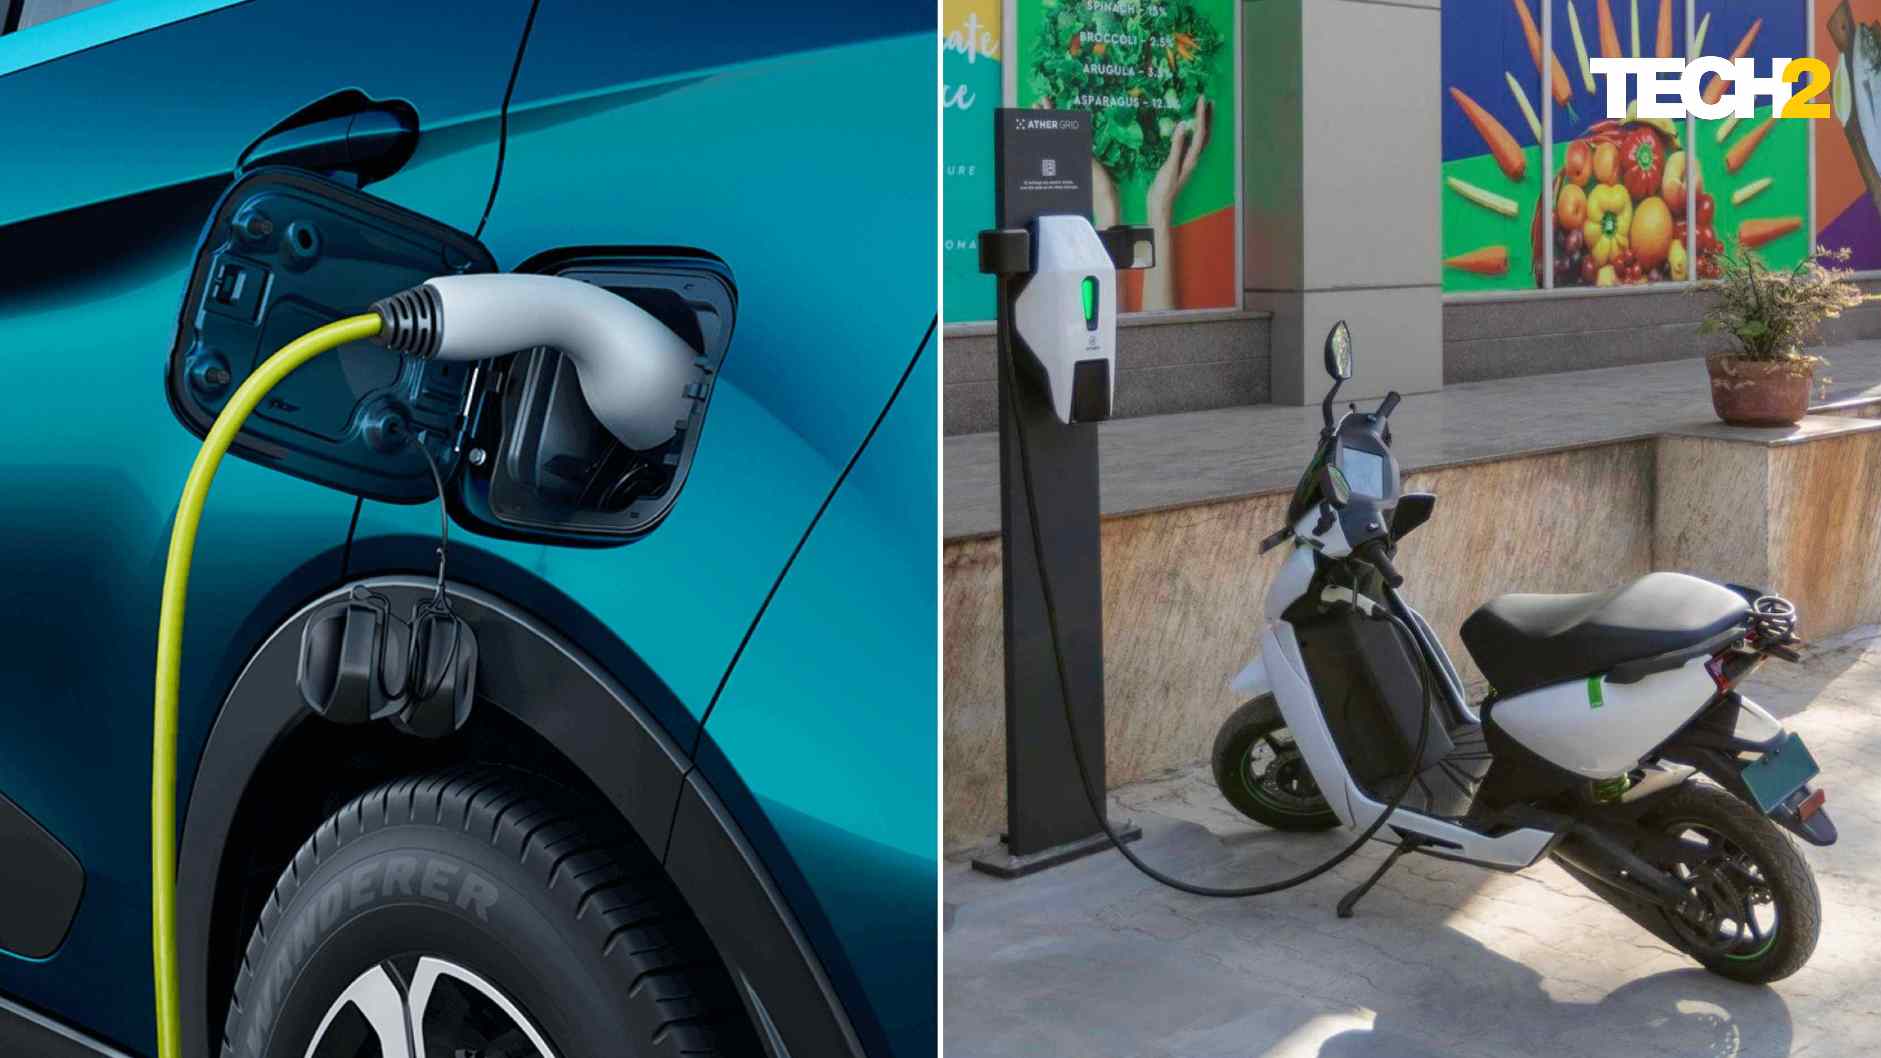 The Maharashtra EV policy 2021 provides increased subsidy for both electric two-wheelers and electric cars and SUVs. Image: Tech2/Amaan Ahmed